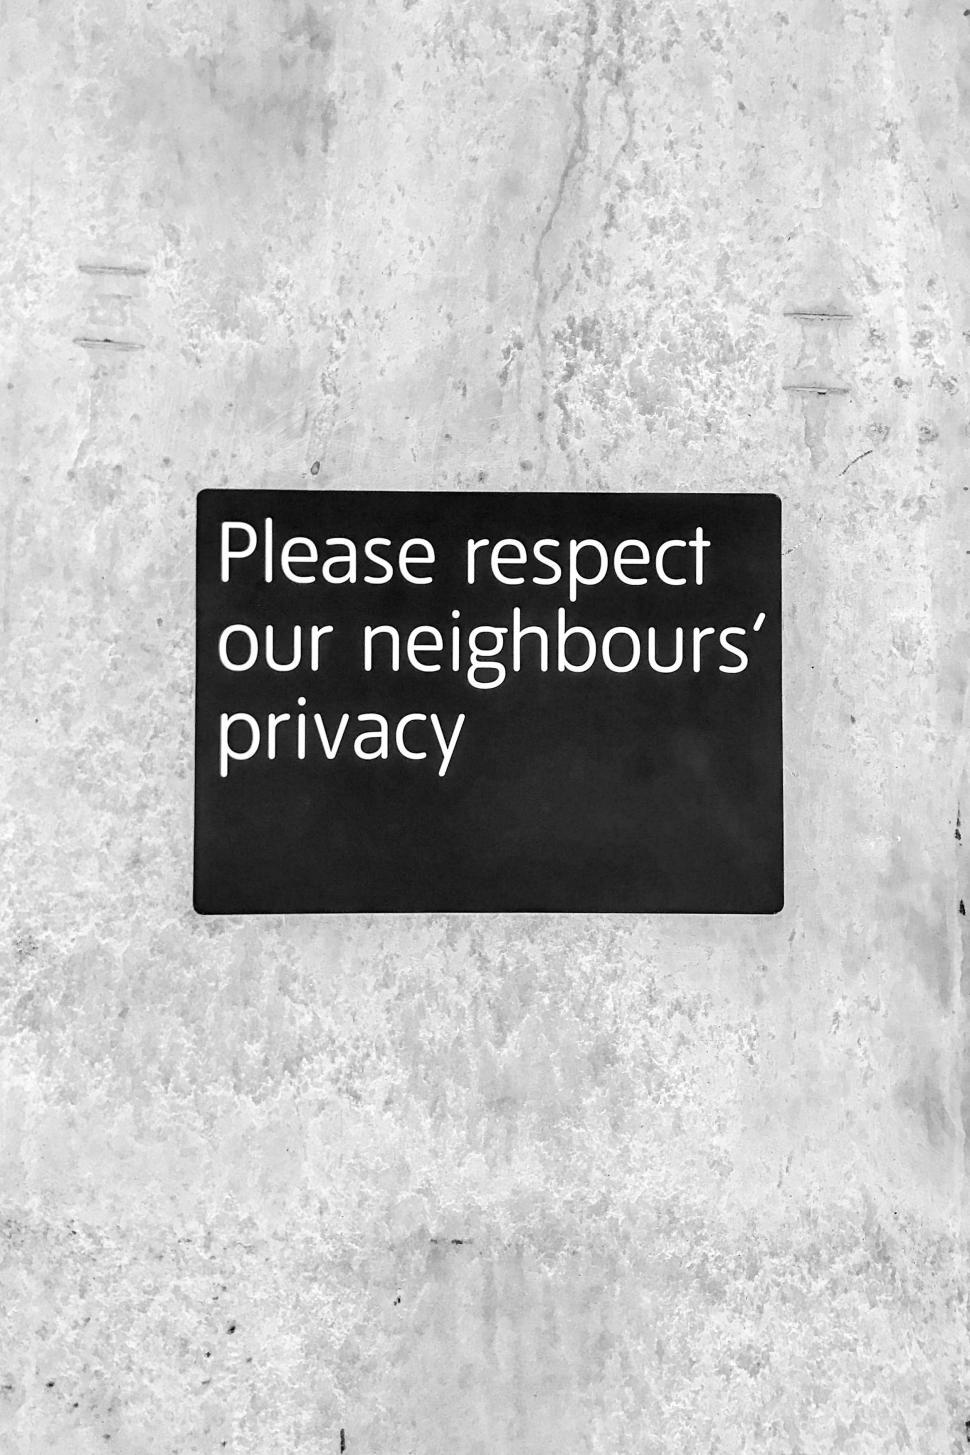 Free Image of Please Respect Our Neighbors Sign 